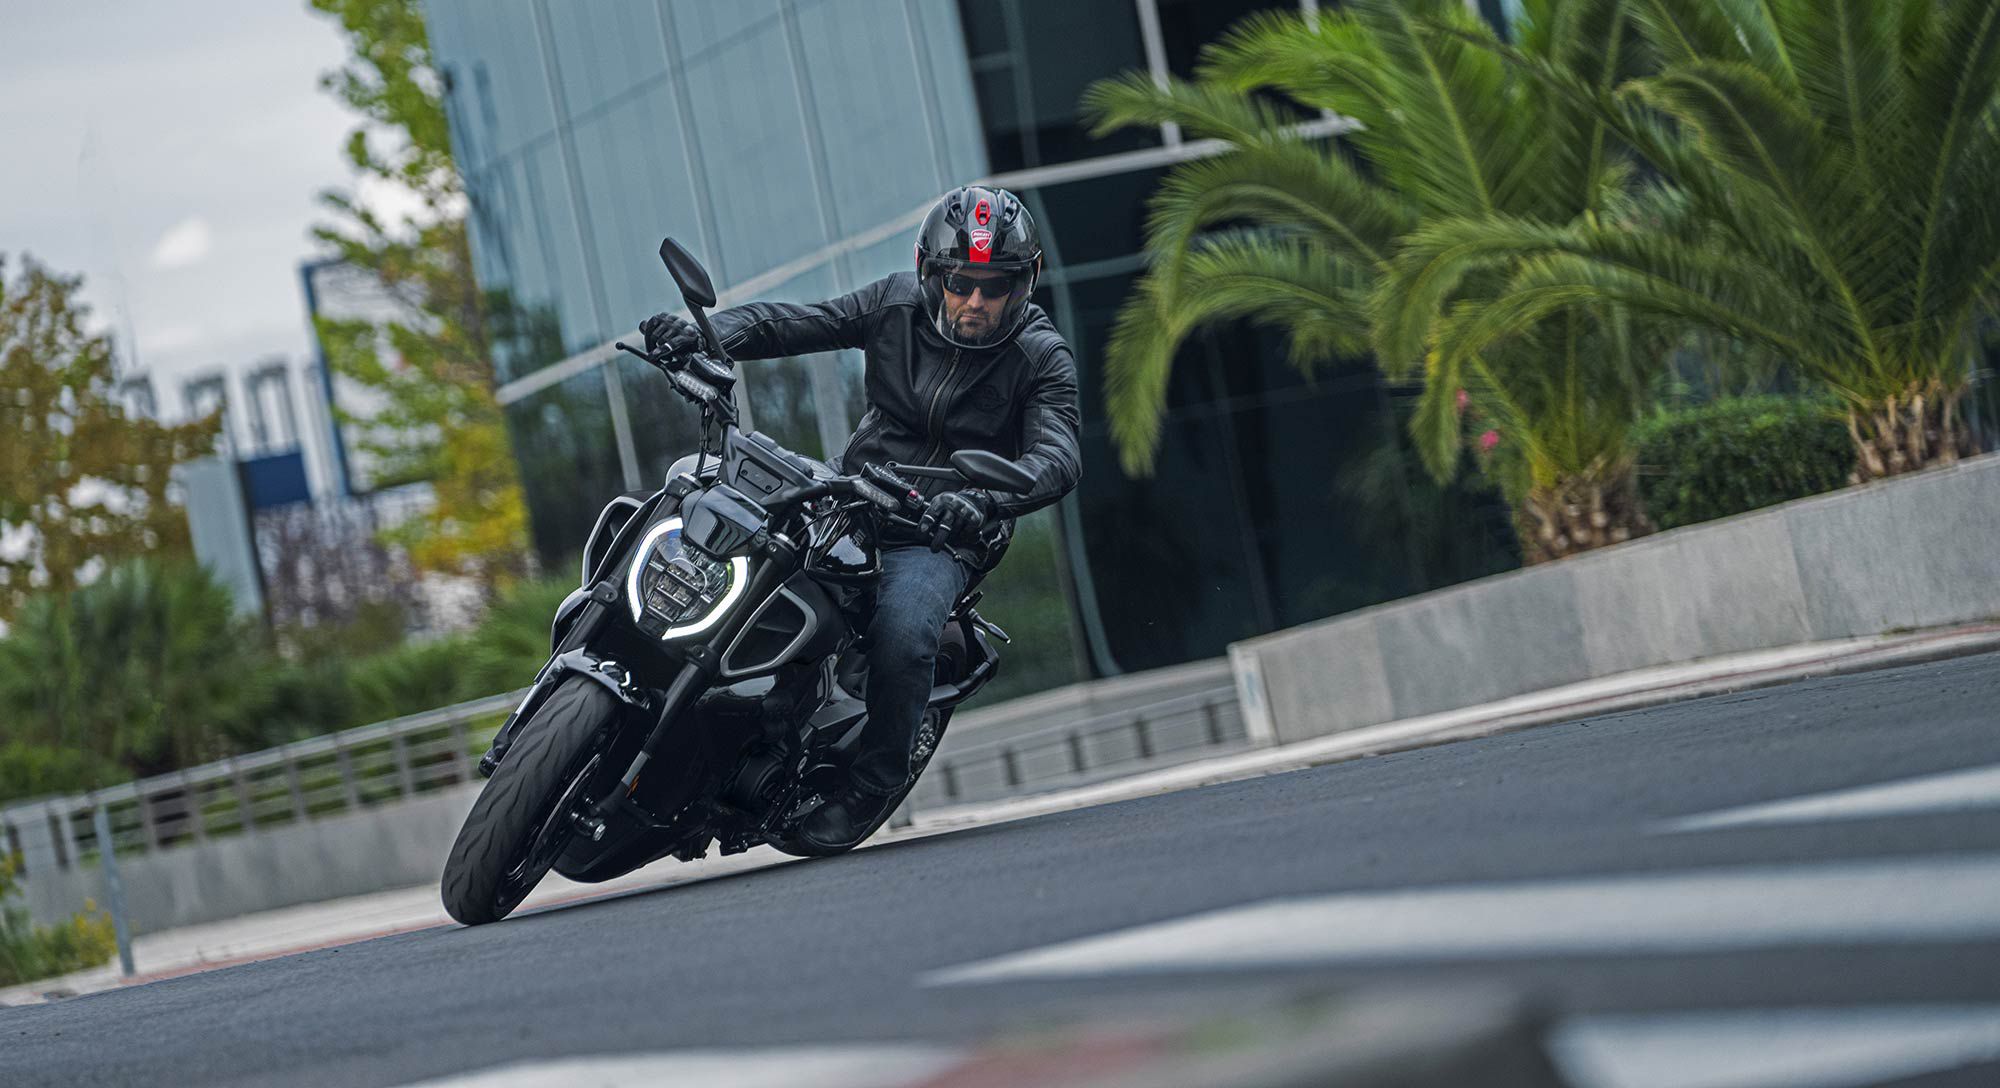 The Diavel is built for more than just cruising the open highway.